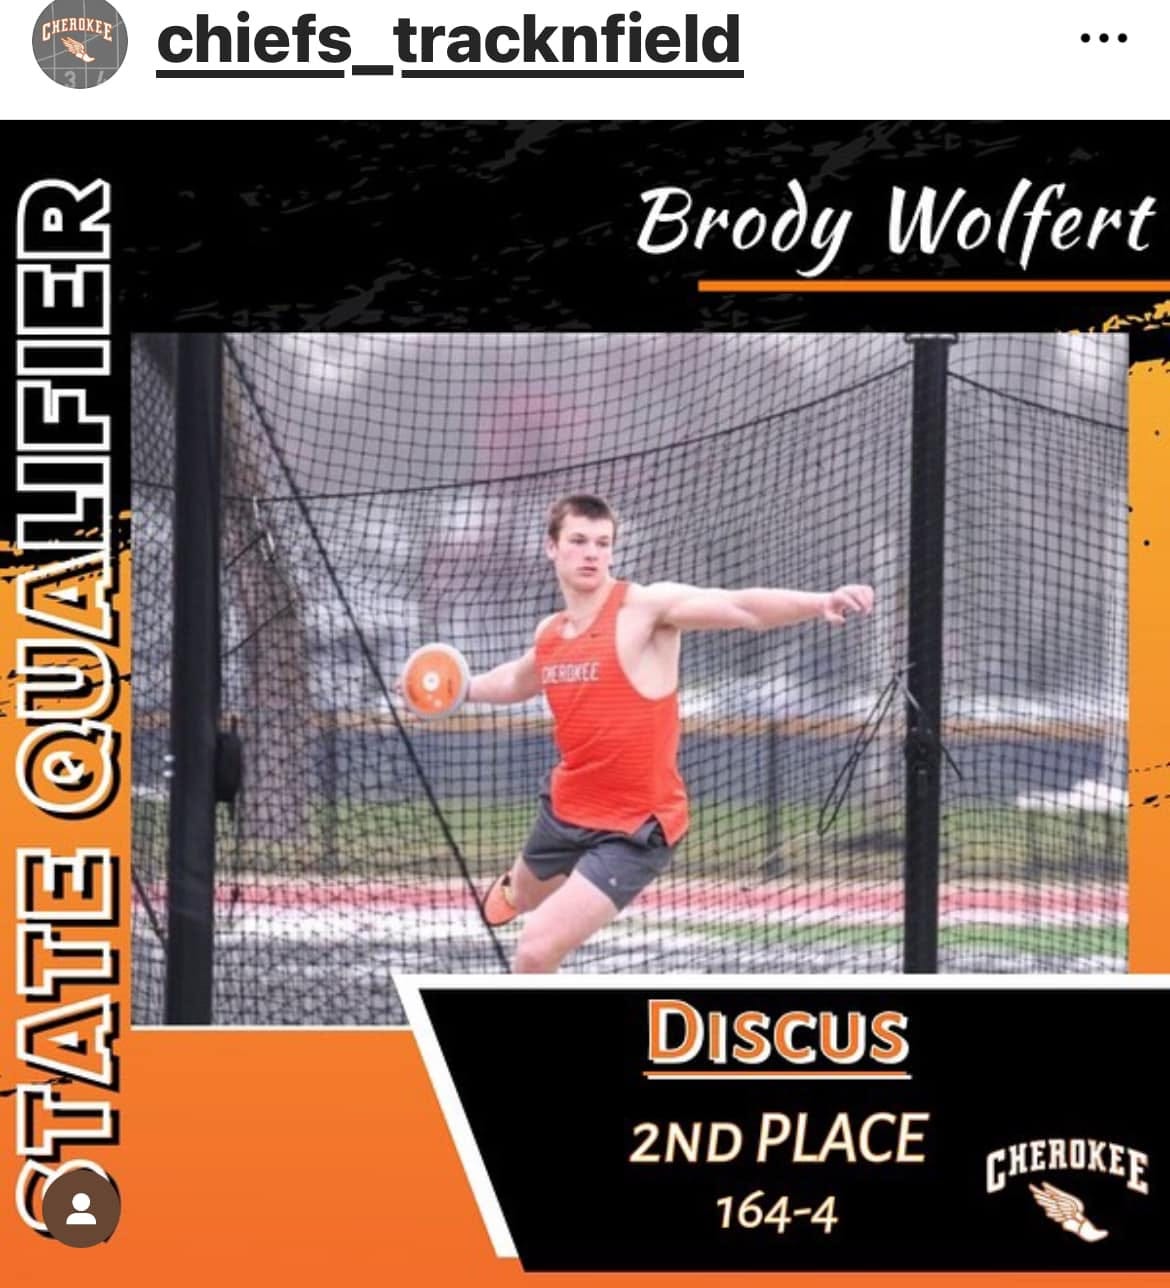 May be an image of 1 person, track and field, frisbee and text that says 'CHERSKEE chiefs chiefs_tracknfield … Brody Wolfert DEROKEE ASN TAT DISCUS 2ND PLACE 164-4 CHEROKEE'